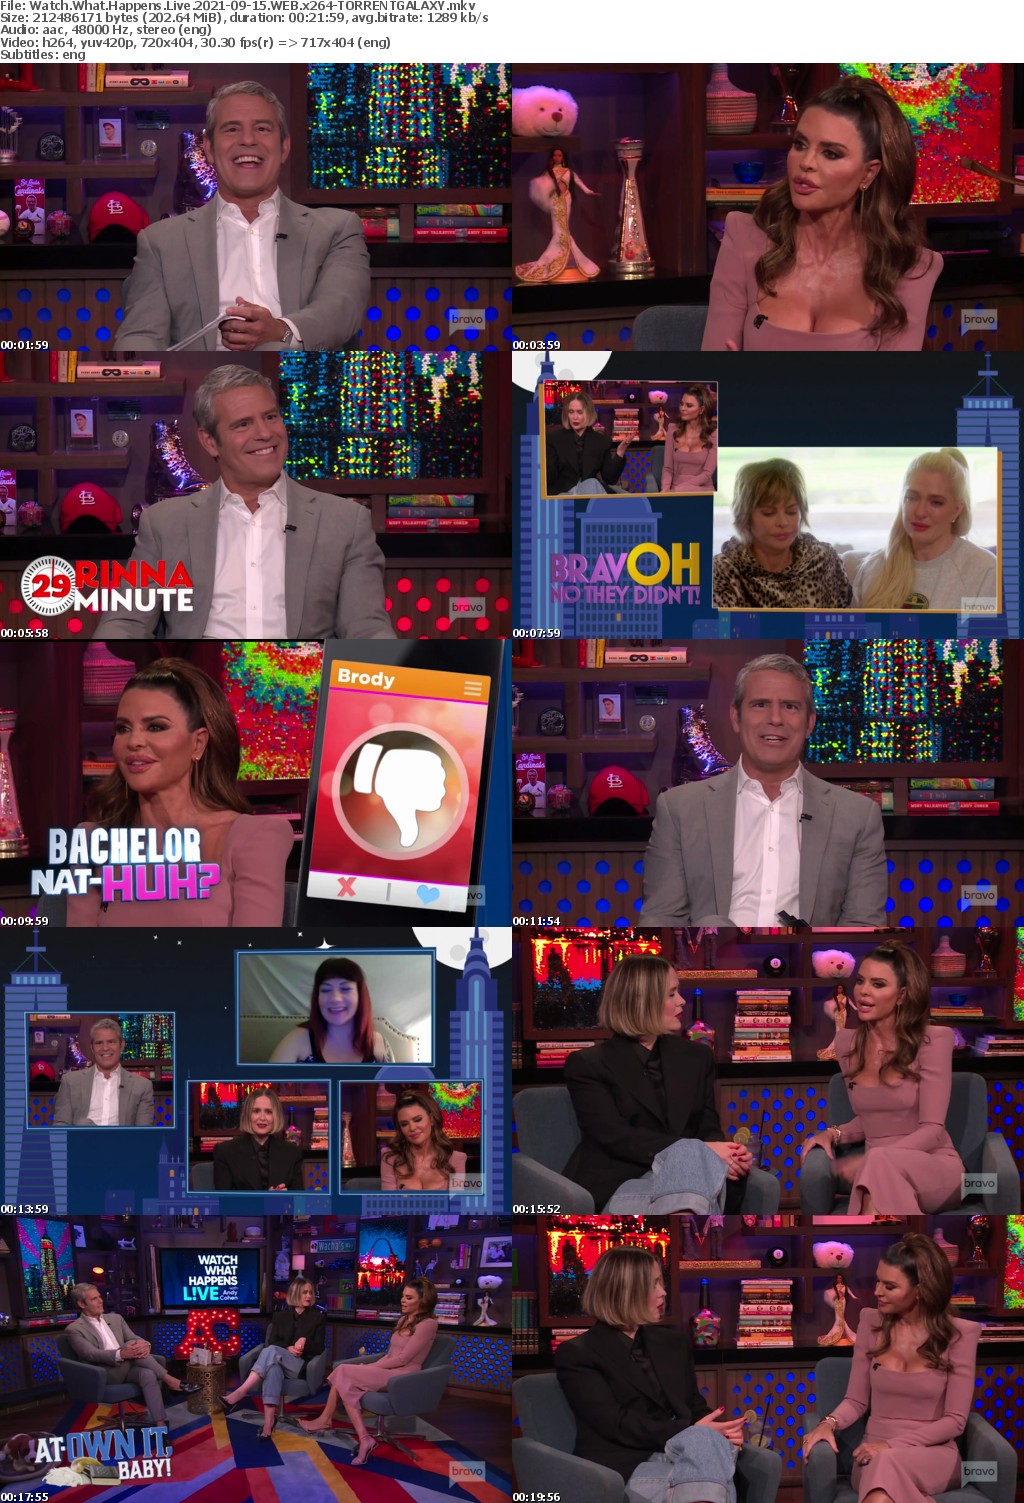 Watch What Happens Live 2021-09-15 WEB x264-GALAXY